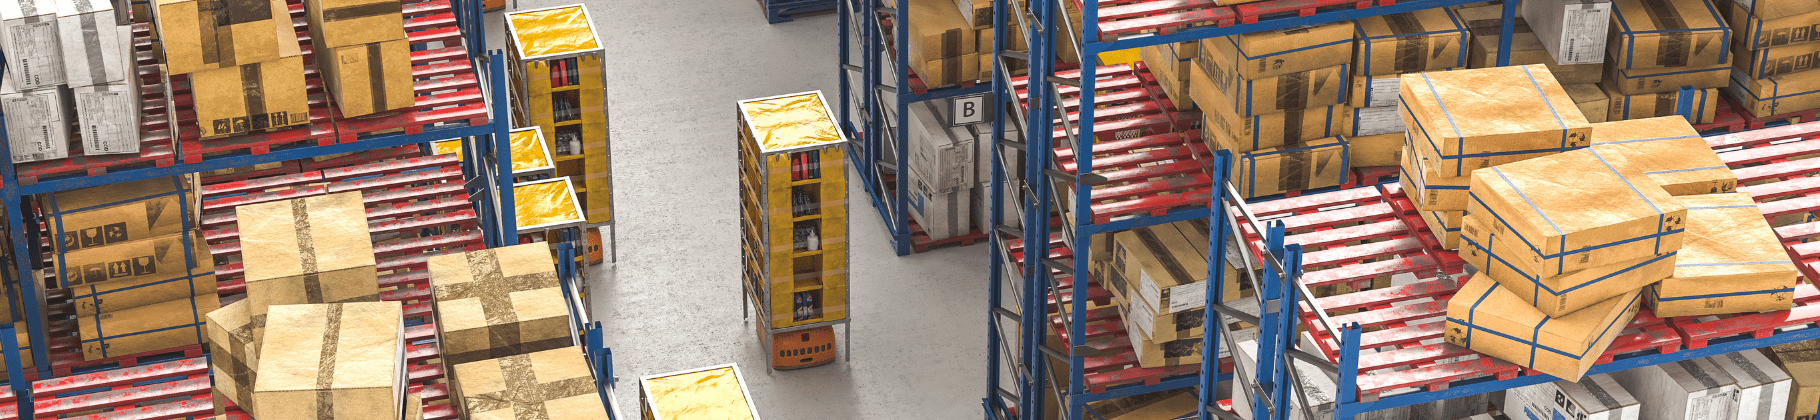 View of Warehouse Filled with Boxes from Above